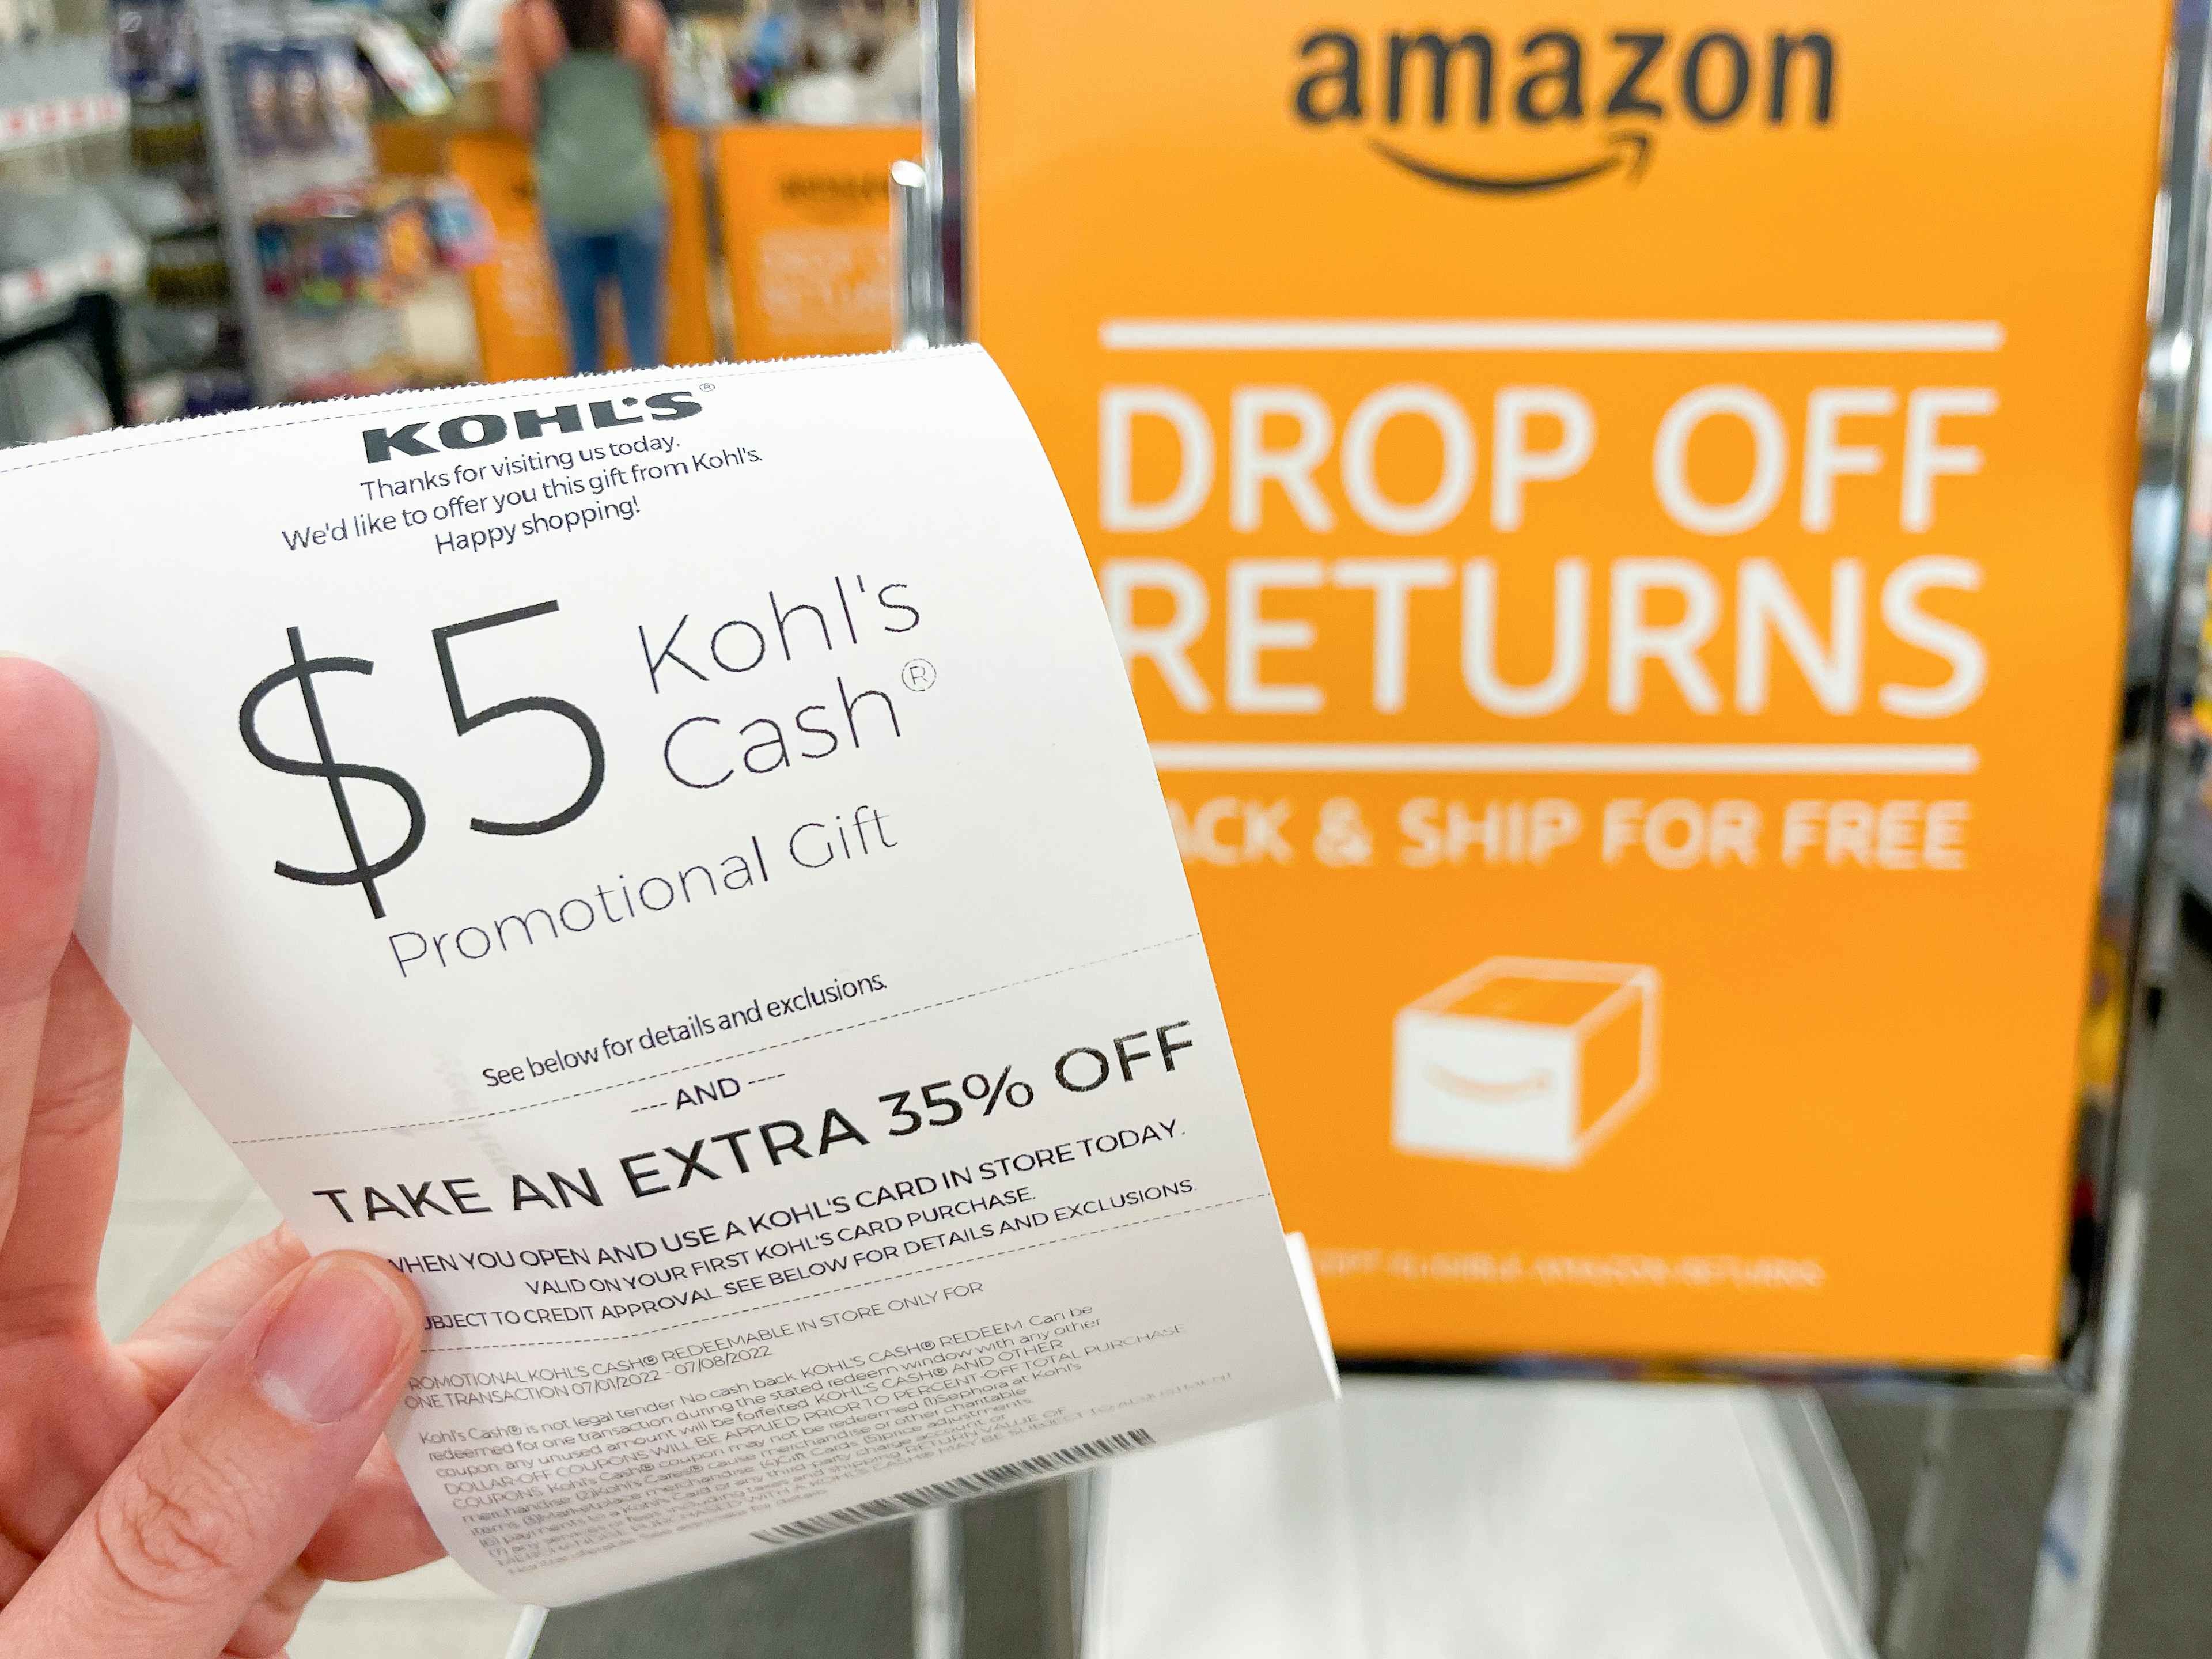 A person's hand holding a $5 Kohl's Cash coupon on a receipt for returning an Amazon package next to the Amazon drop off returns sign ins...